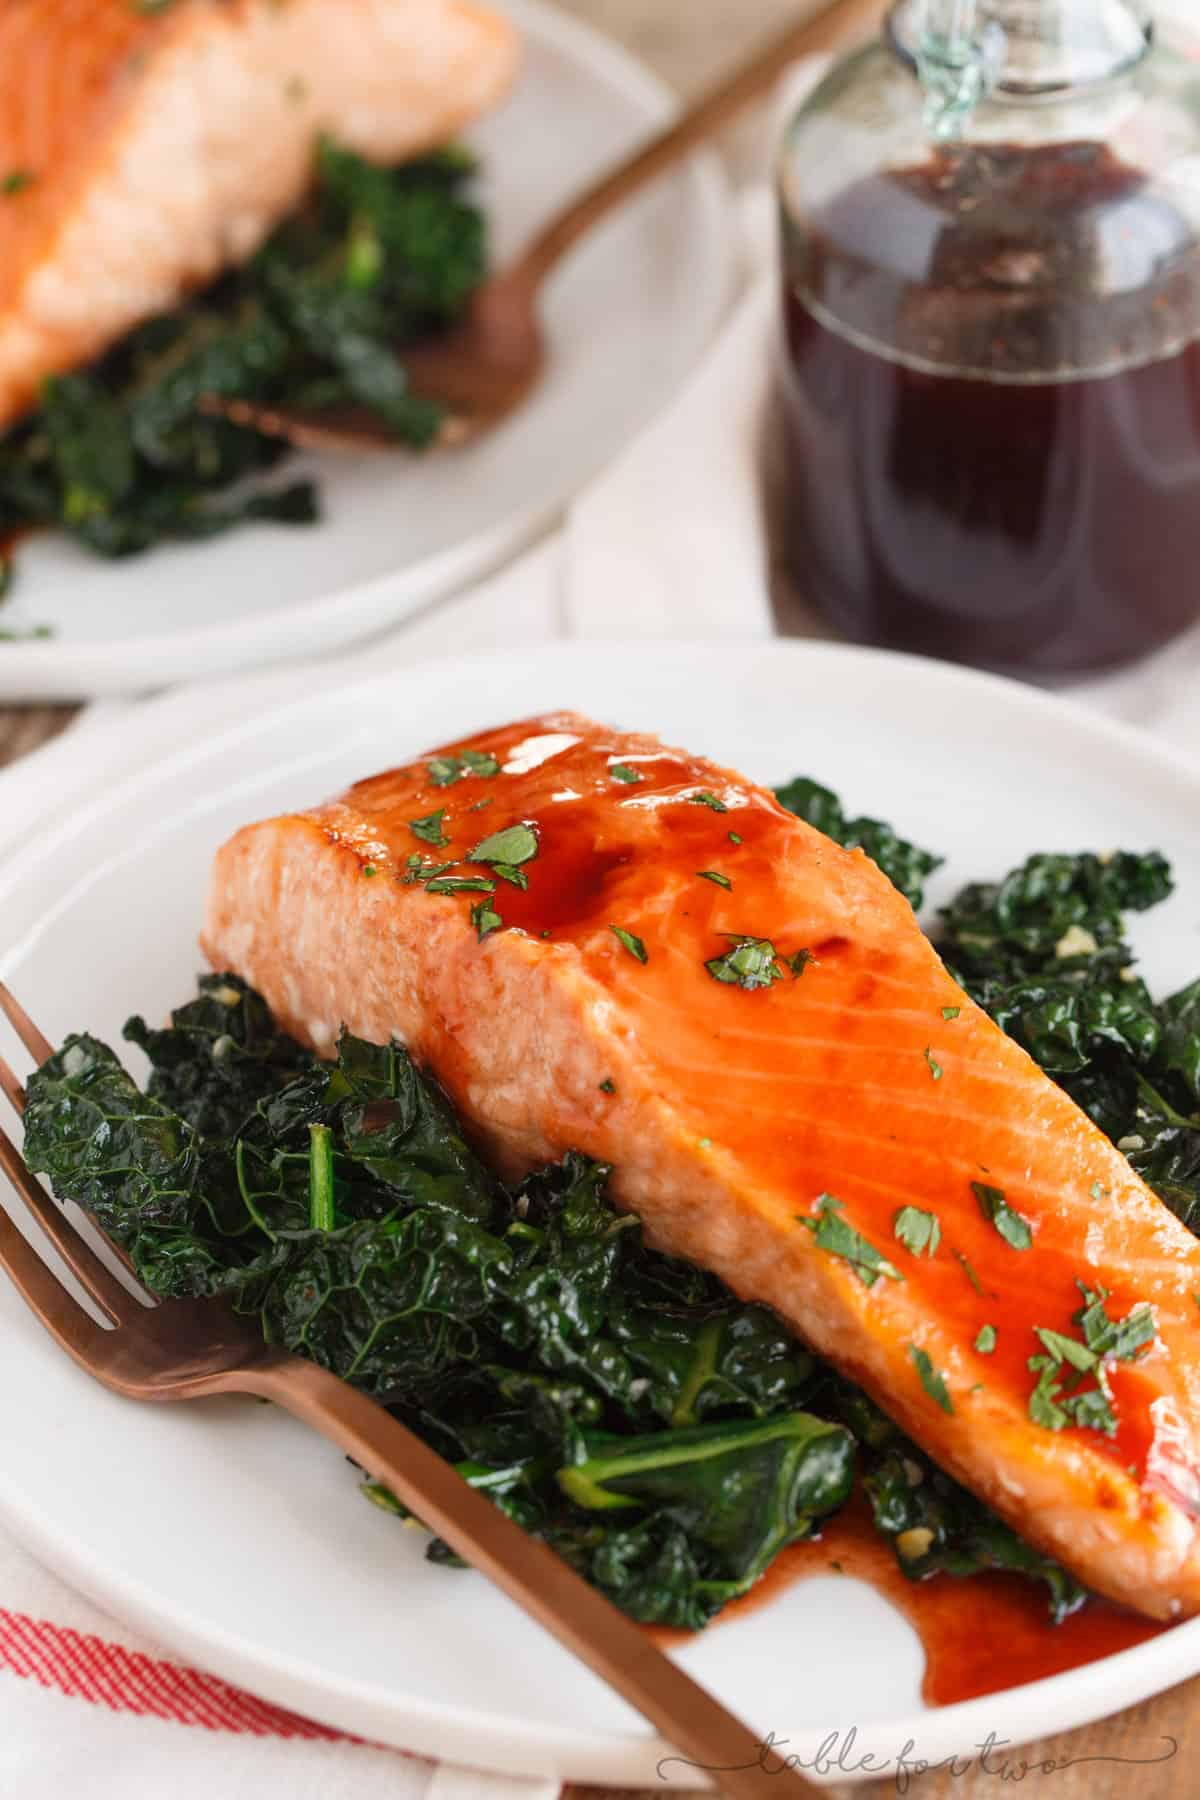 A sweet, tangy, and spicy glaze is generously topped on salmon in this cherry chipotle glazed salmon recipe! You'll discover how versatile this glaze is, as well!